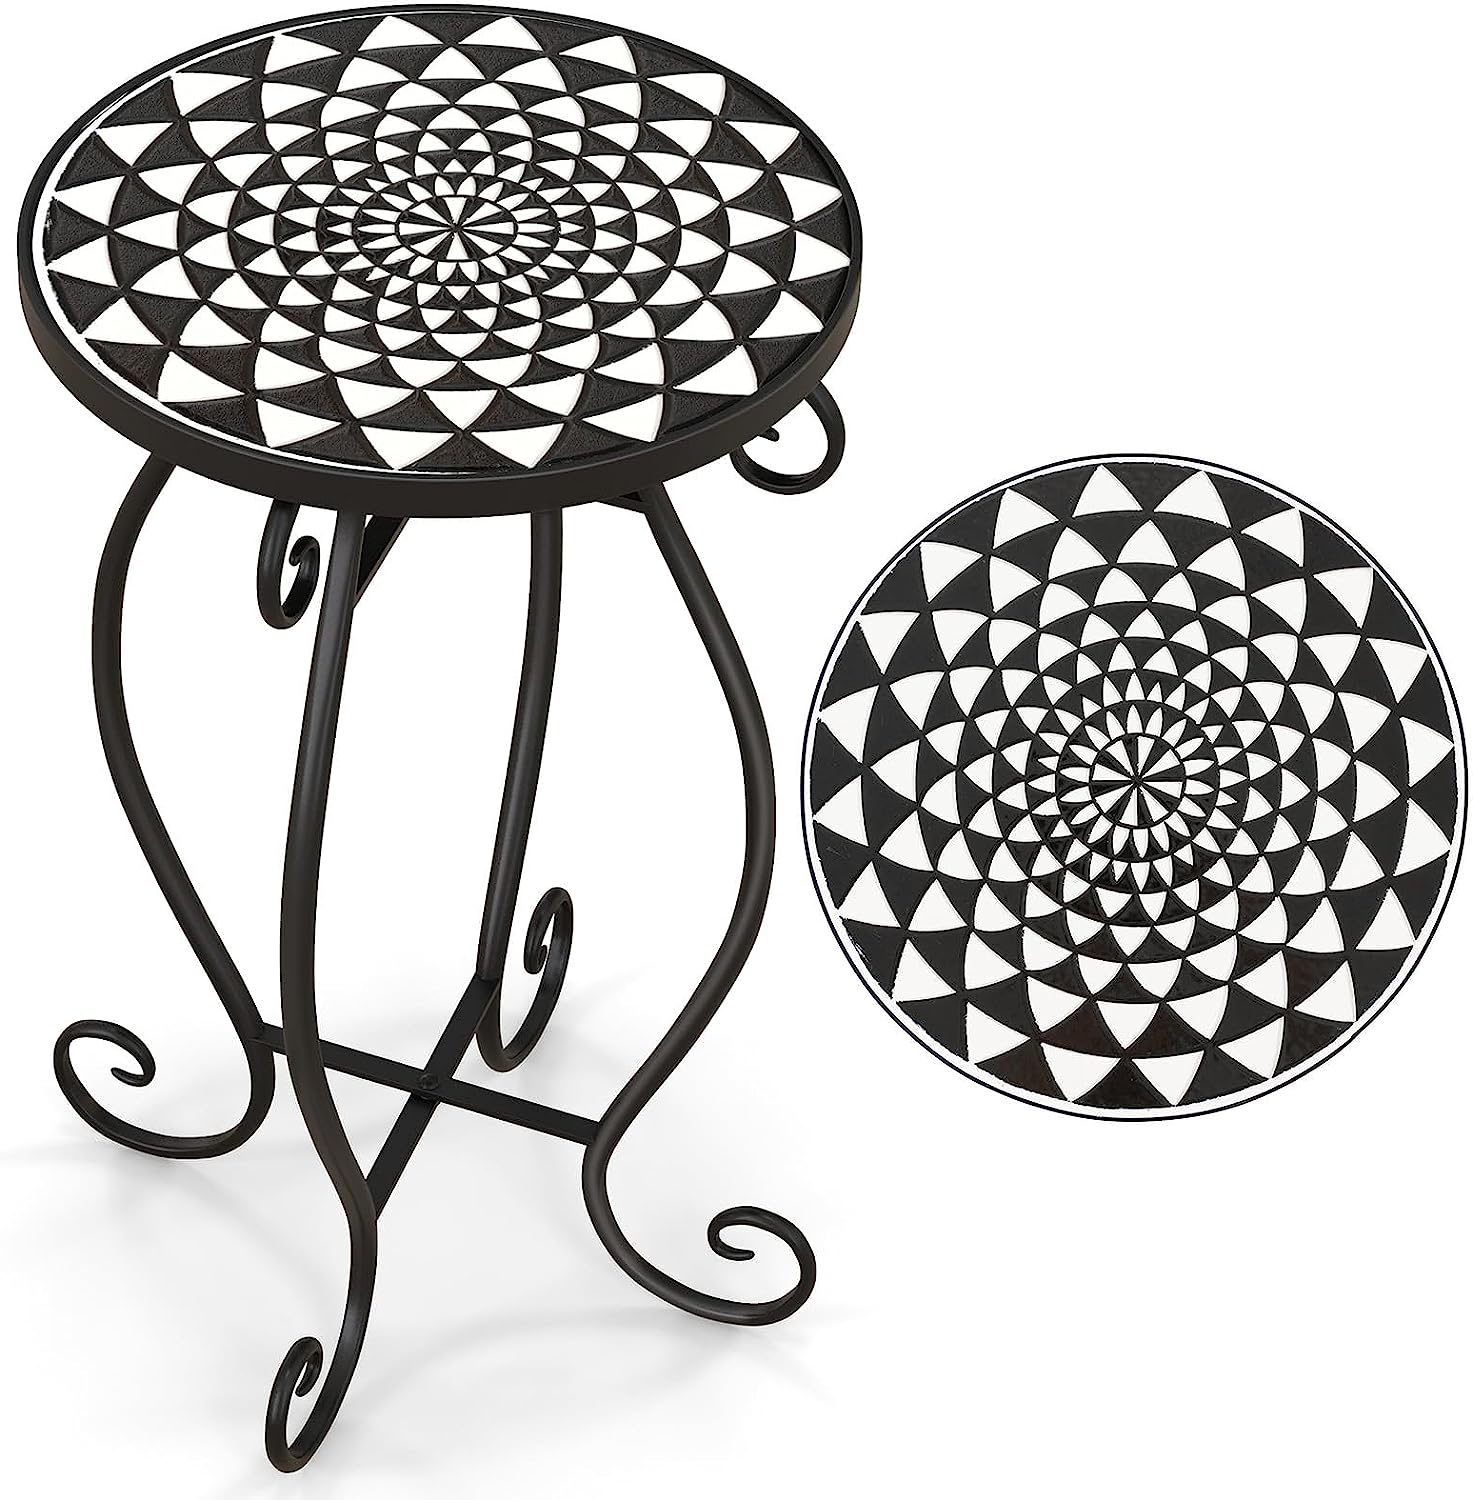 Giantex Folding Mosaic Patio Table, 14'' Outdoor Side Table Round Accent Table Plant Stand with Ceramic Tile Top